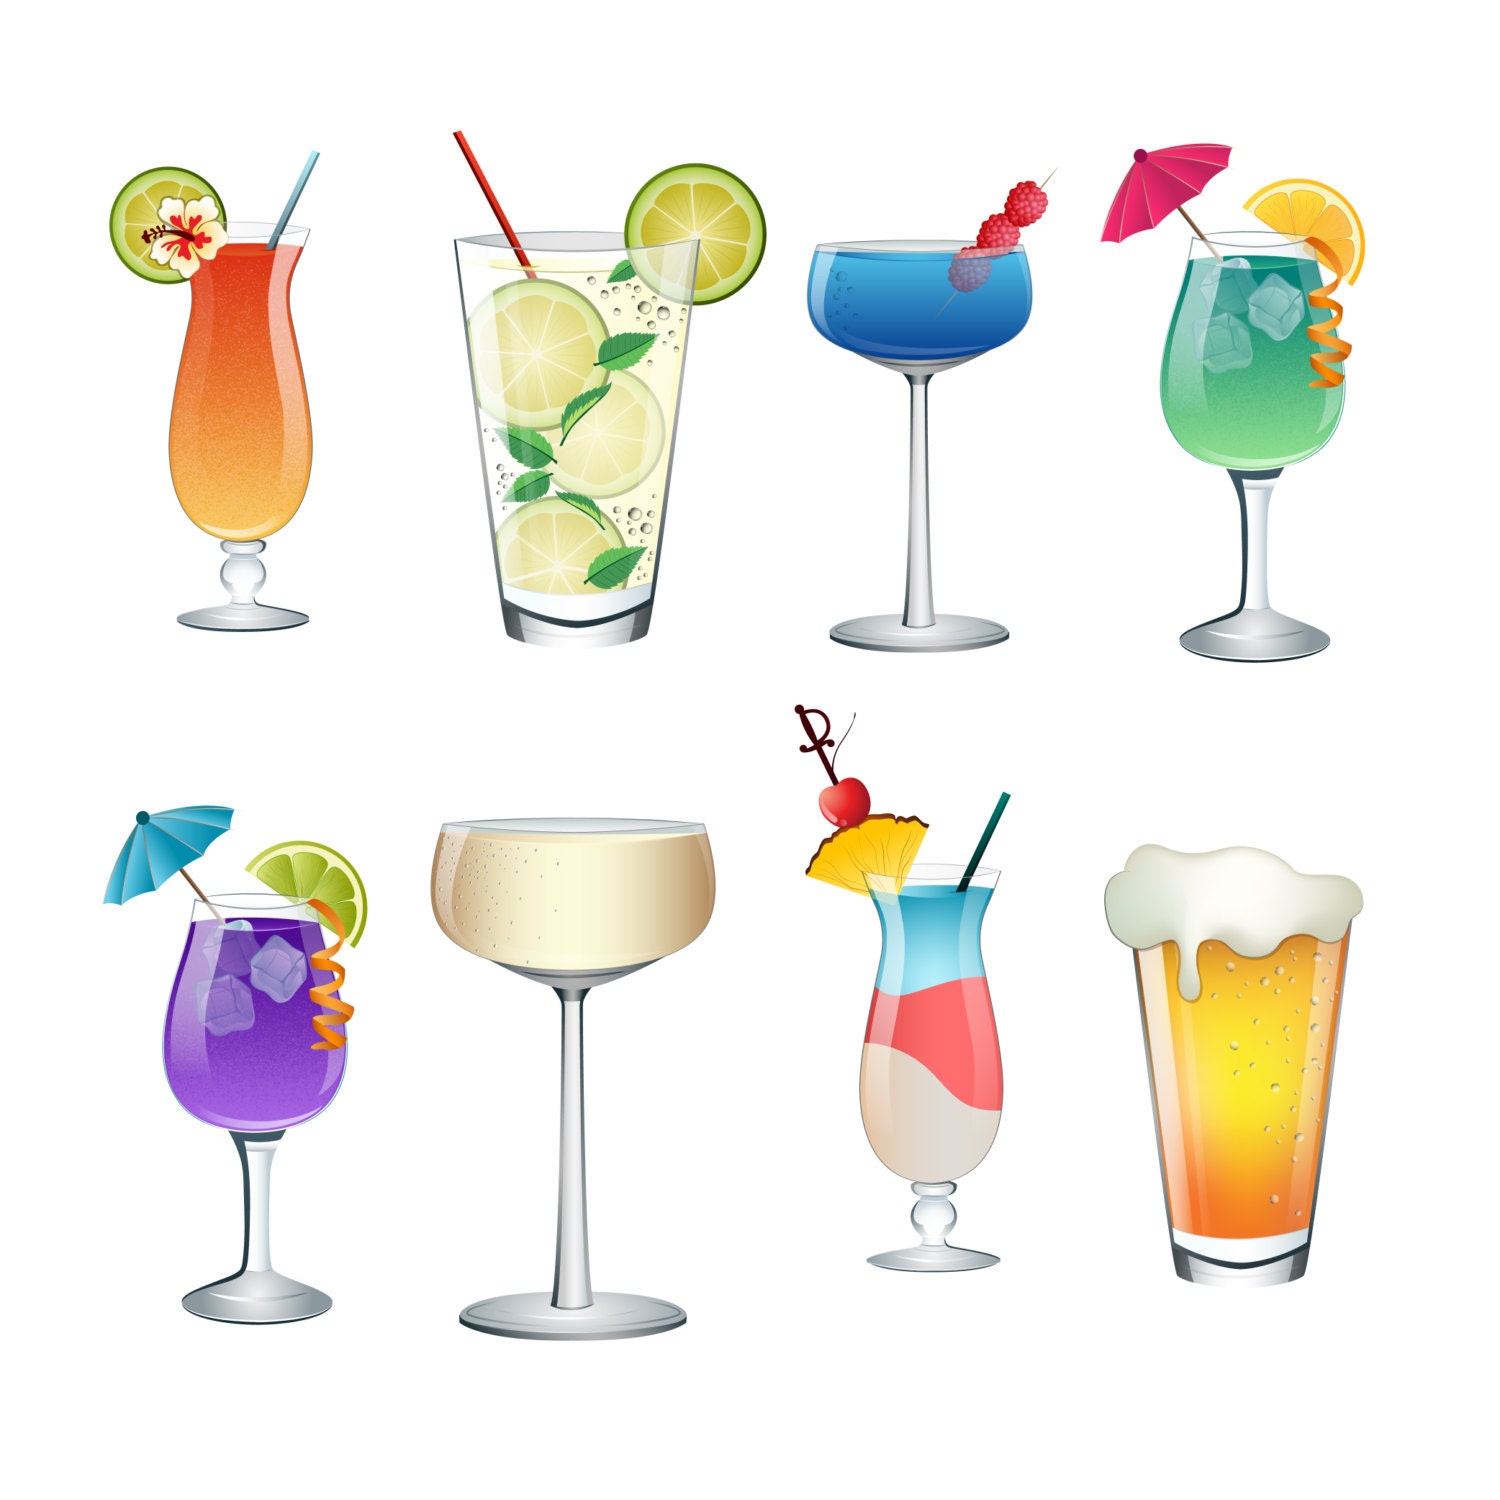 Download Cocktail, Summer Drinks Clip Art- Set of 8 Colorful PNG, JPG, and Vector Files